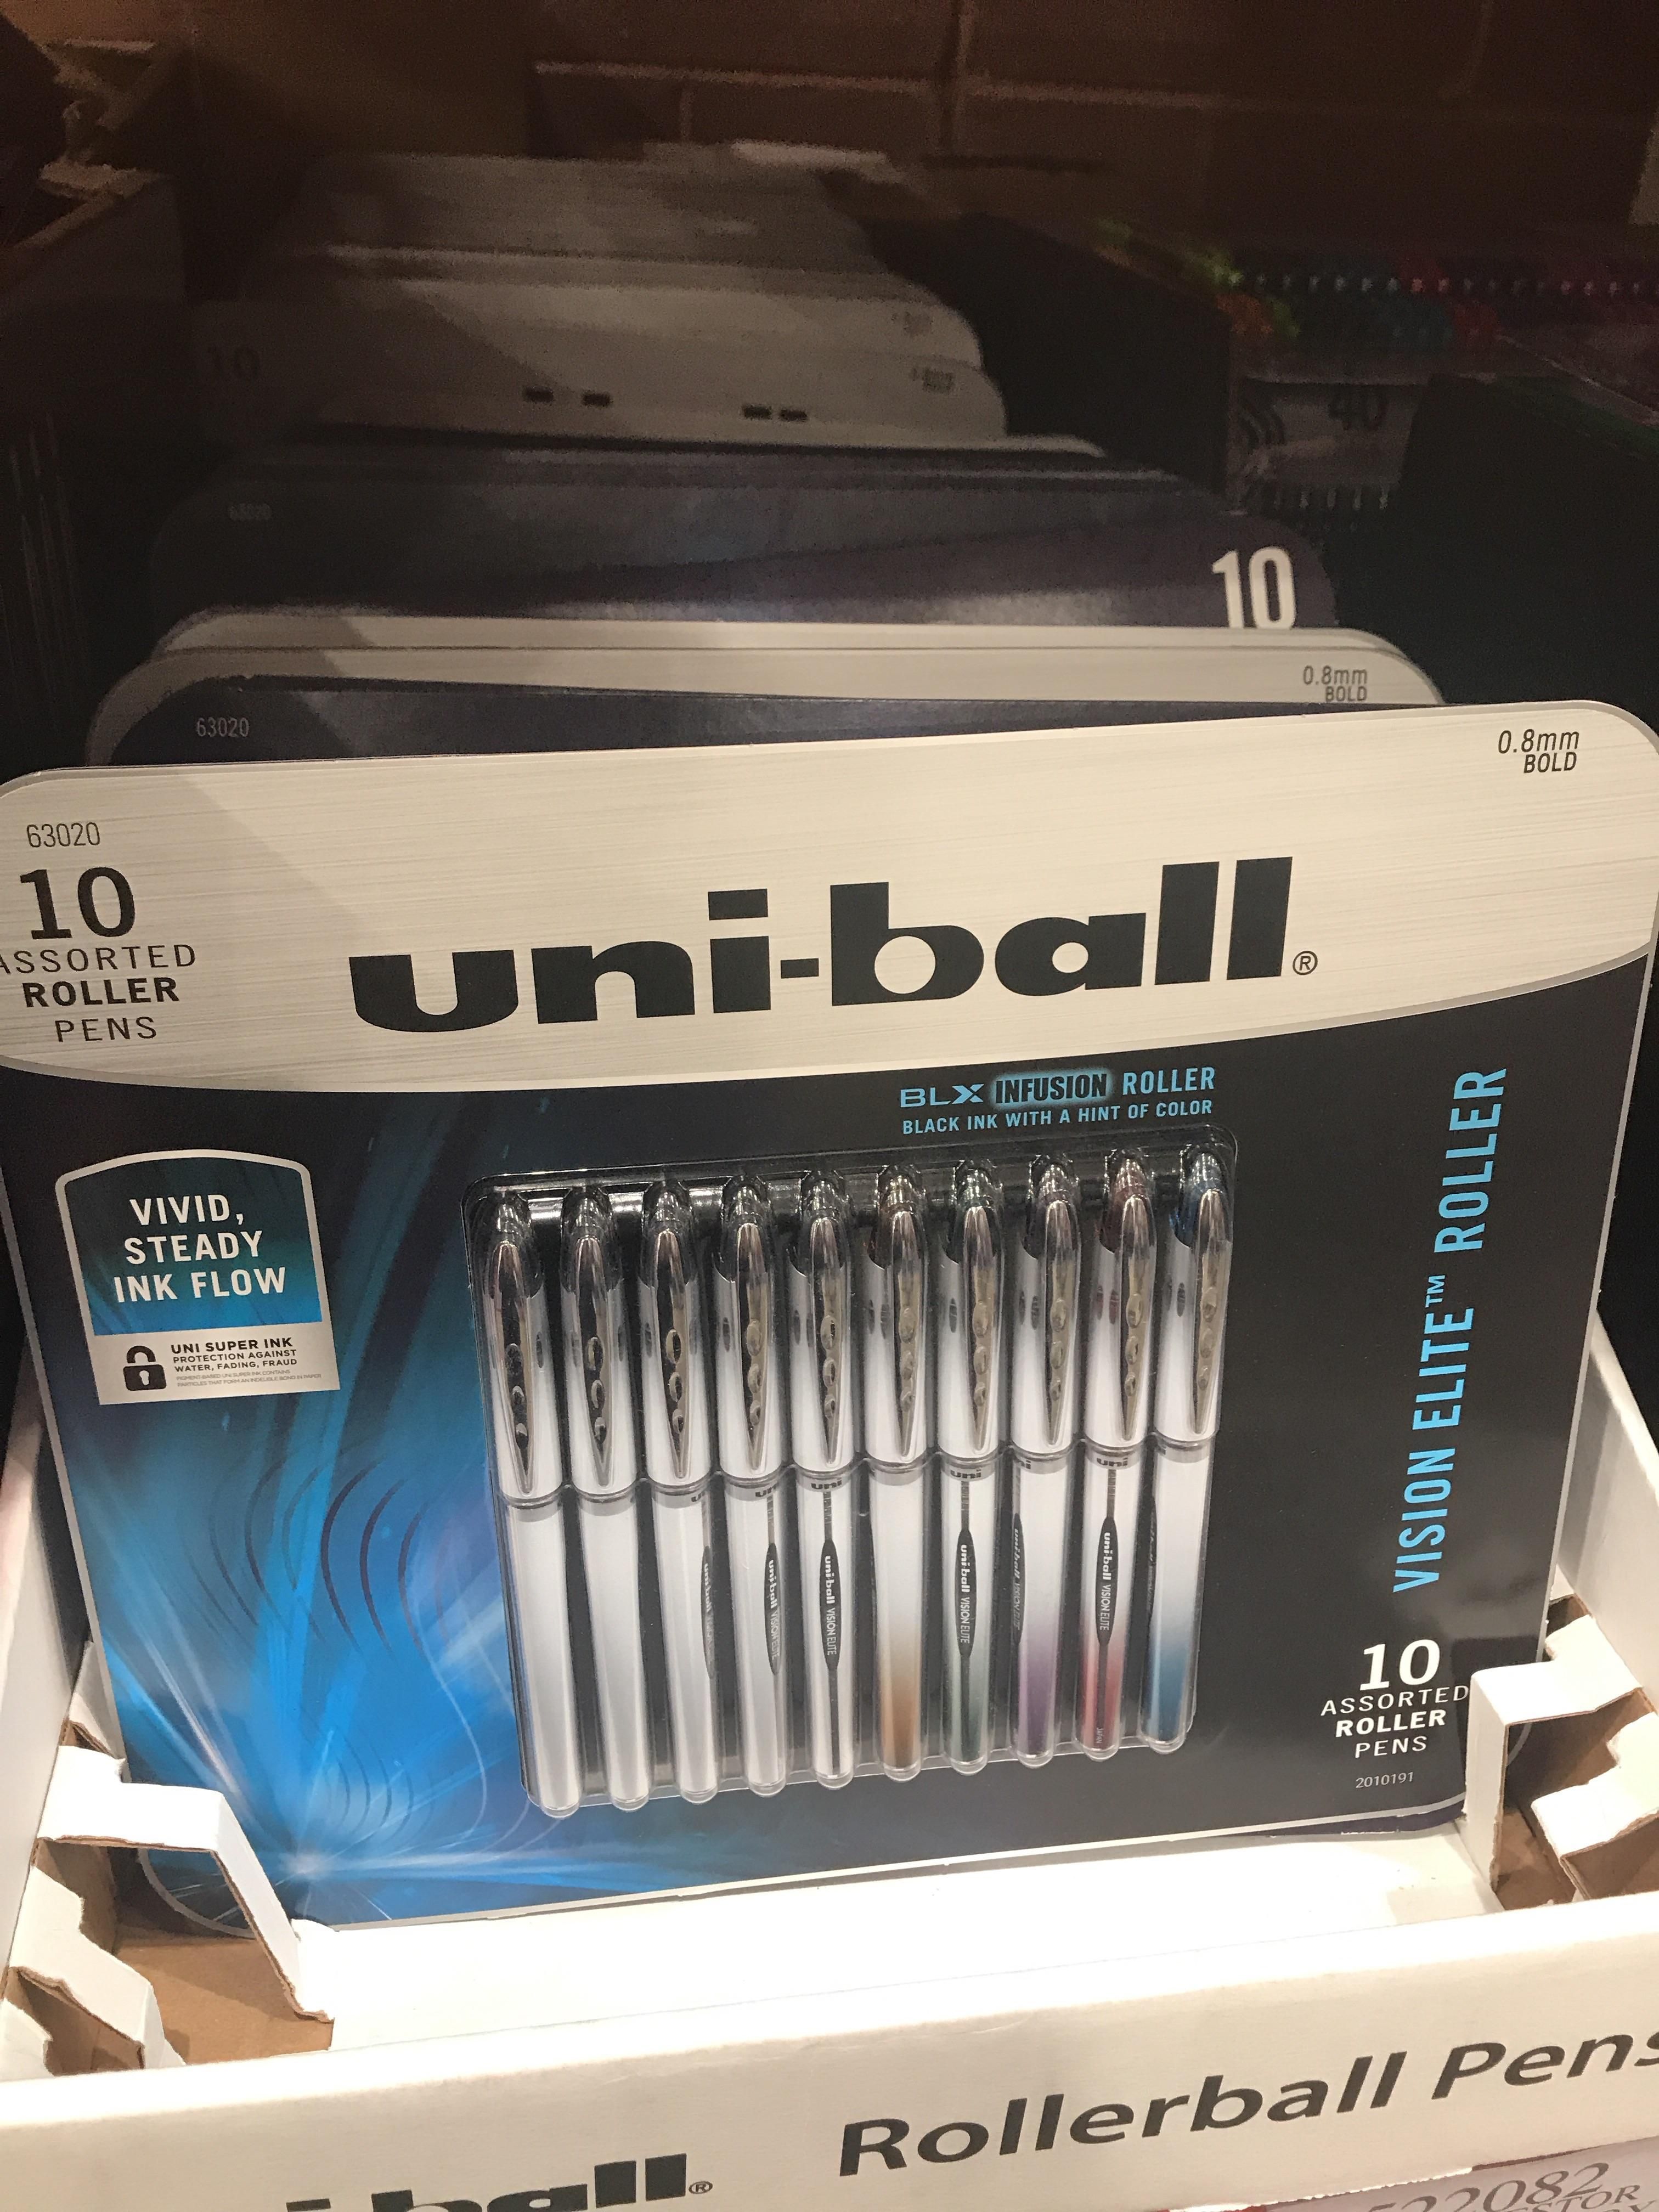 Just beat testicular cancer, so from now on these will be my pen of choice for nursing school.